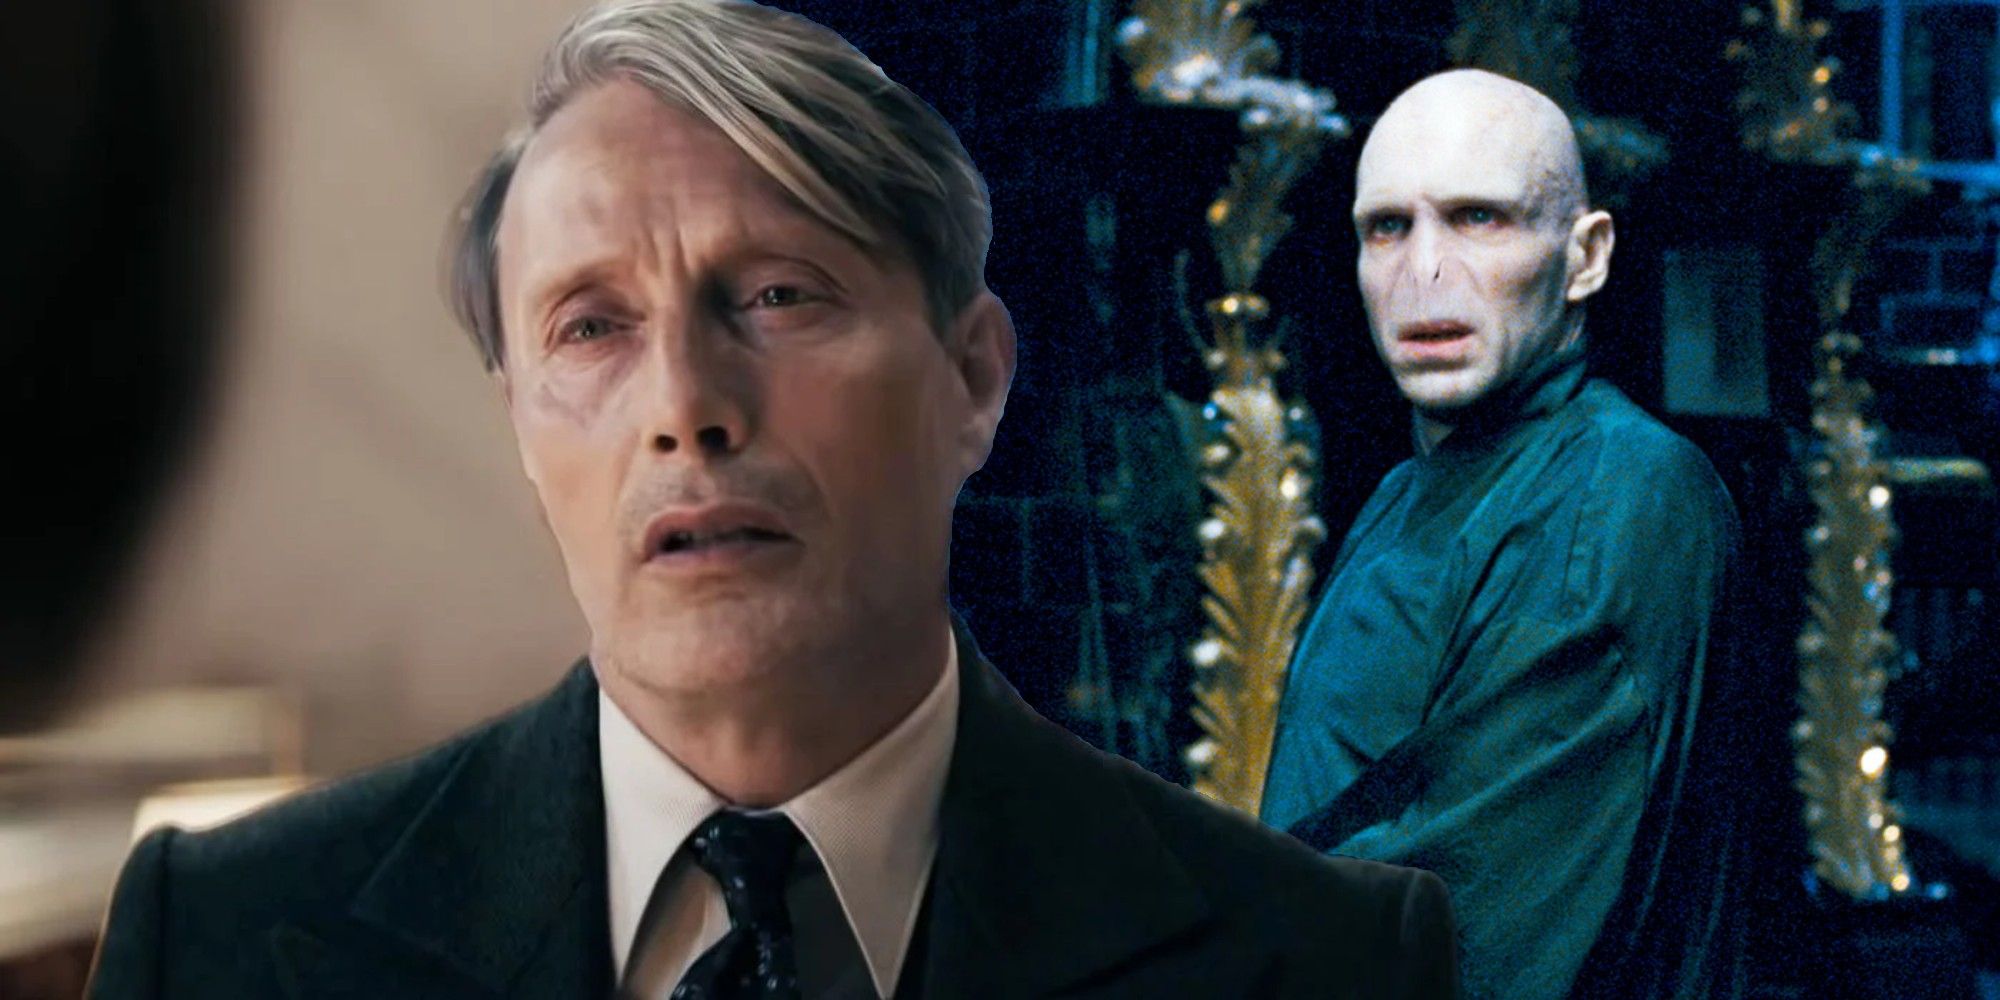 Who is more powerful voldemort of Grindelwald